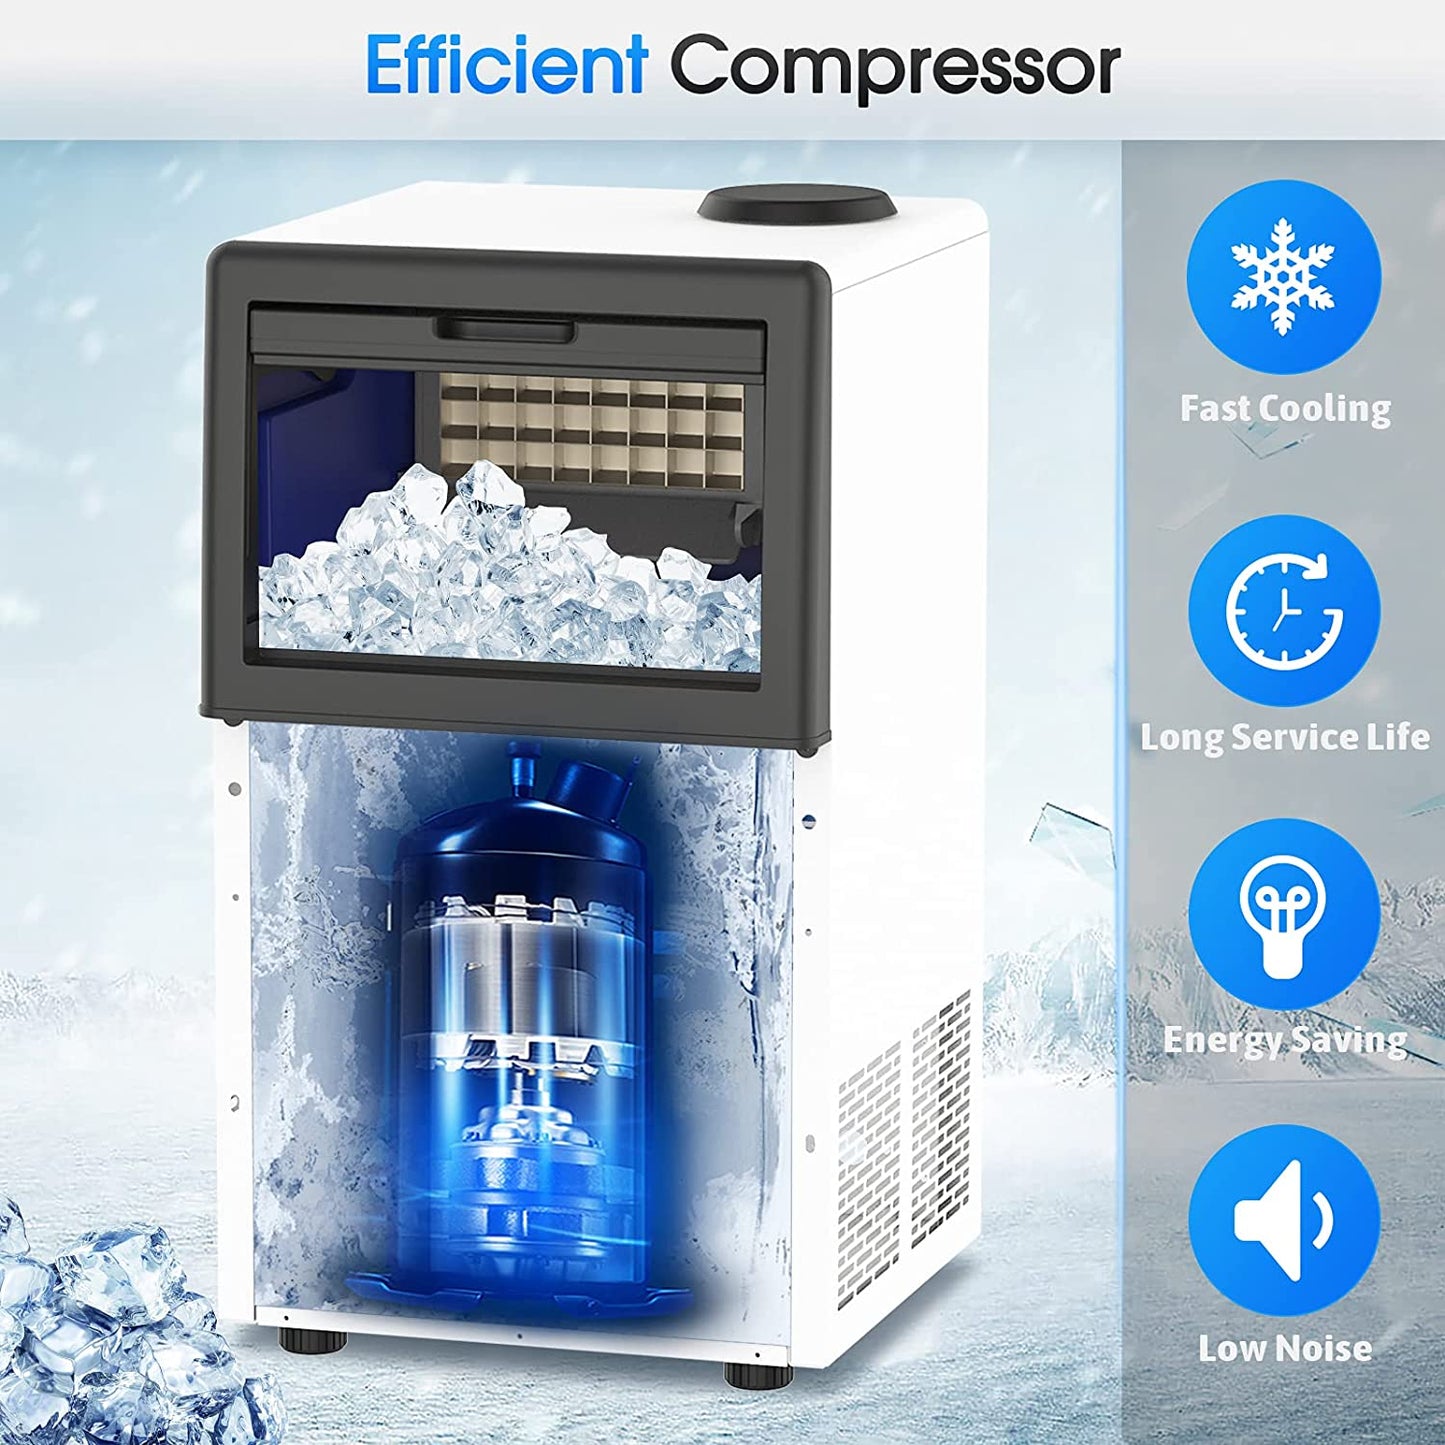 Ice Maker Commercial - 70Lbs/24H Ice Machine 32 Ice Cubes in 11-20 Minutes, Freestanding Cabinet Ice Maker with 13 Lbs Storage Bin, 2 Ways Add Water for Bar Home Office Restaurant